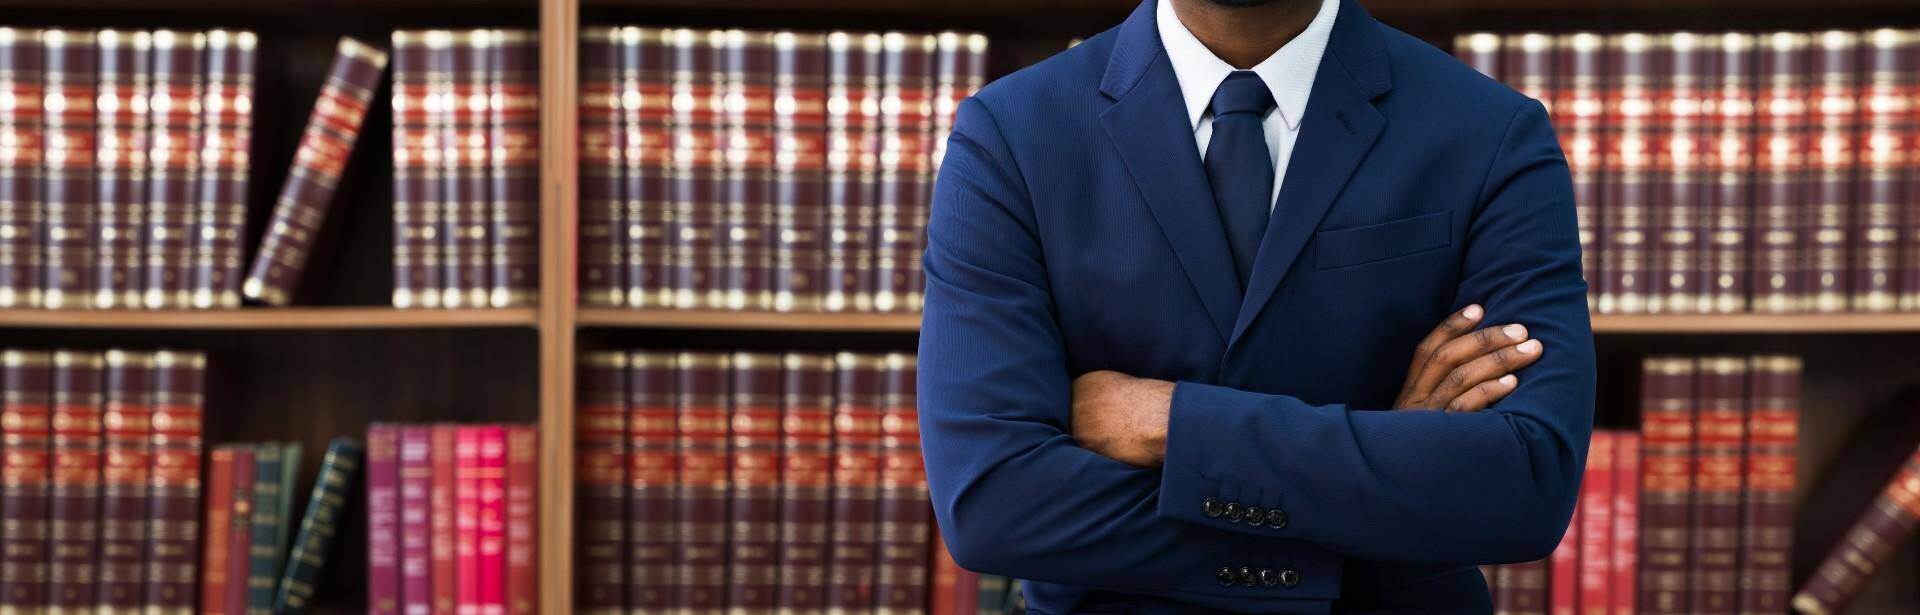 A black lawyer standing in front of a bookshelf of law book in Canton, Georgia